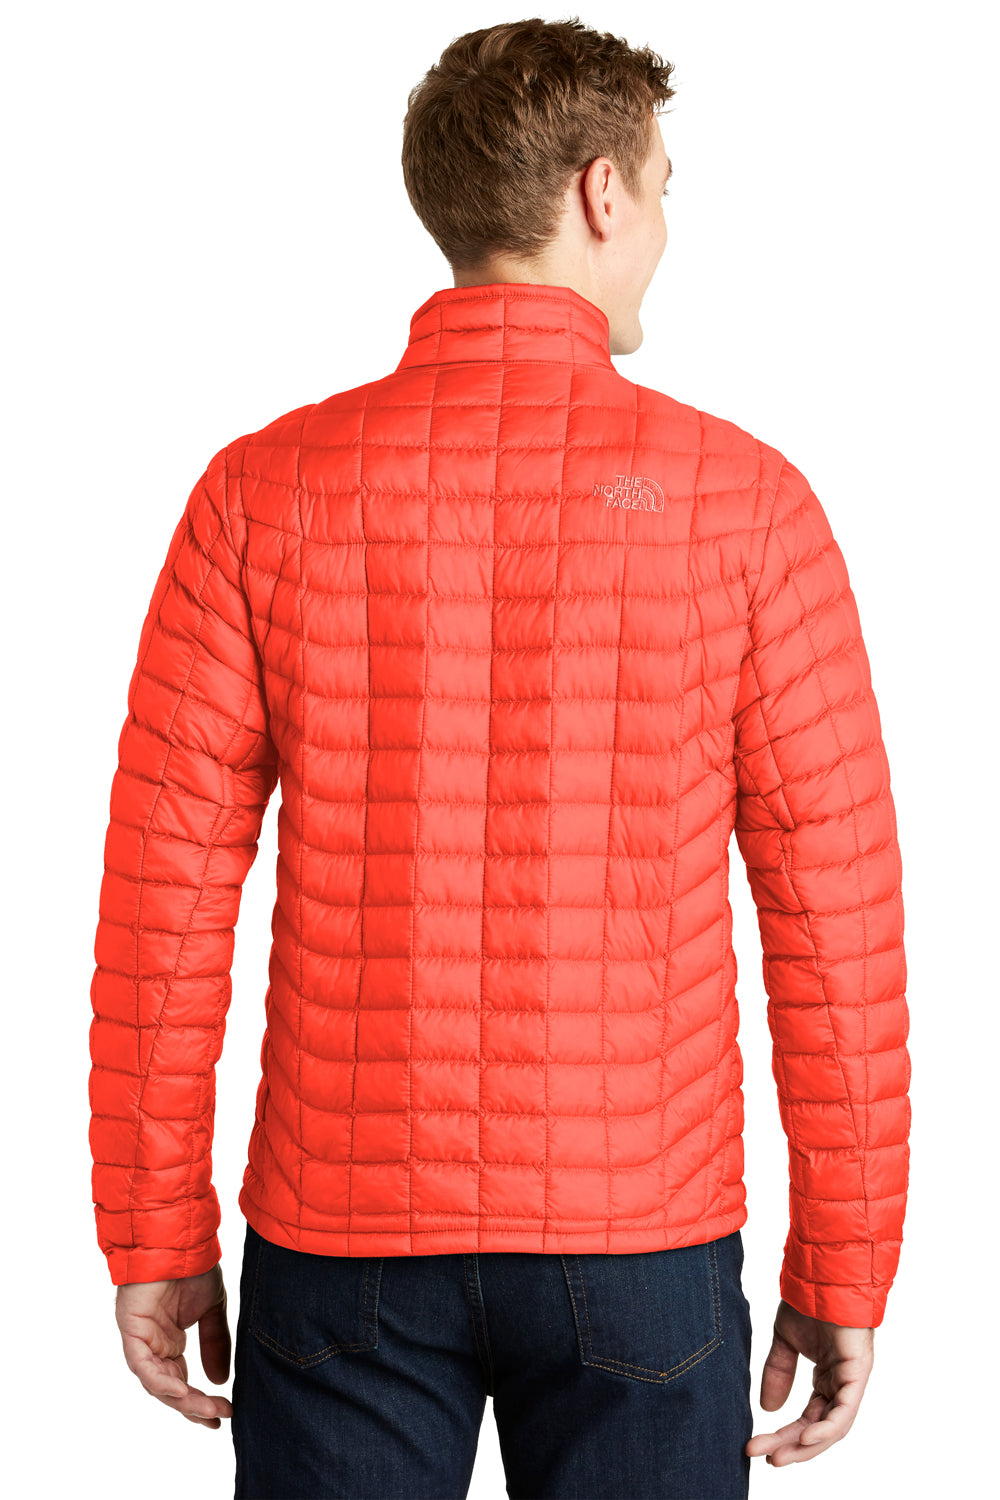 The North Face NF0A3LH2 Mens ThermoBall Trekker Water Resistant Full Zip Jacket Brick Red Back